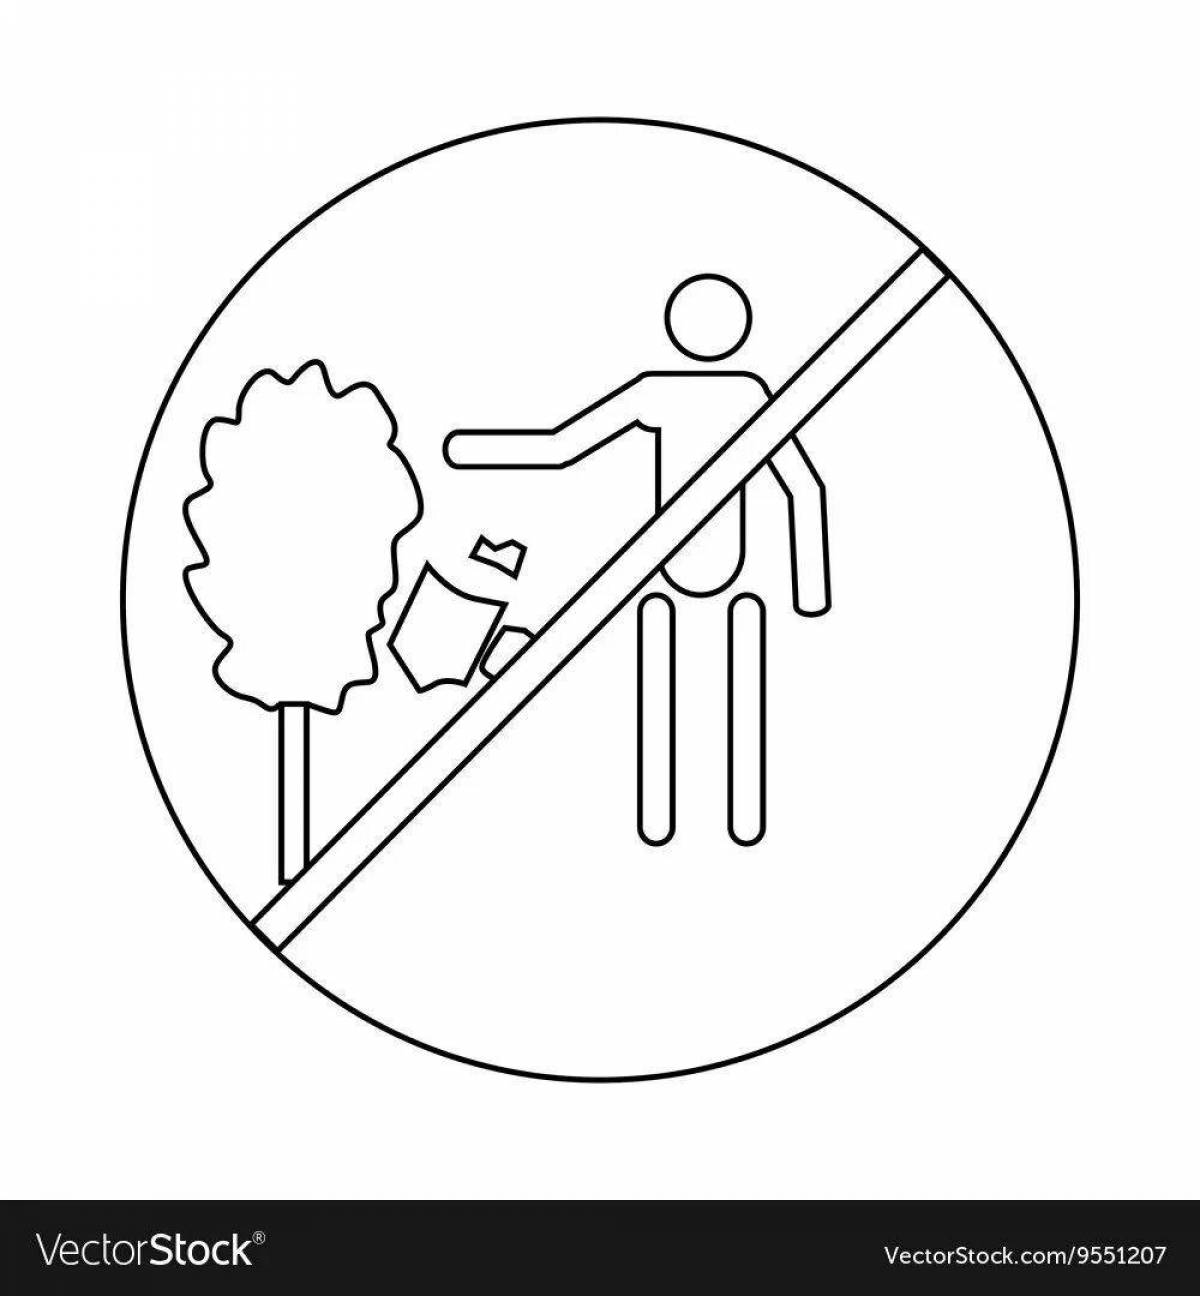 Glowing environmental signs coloring page